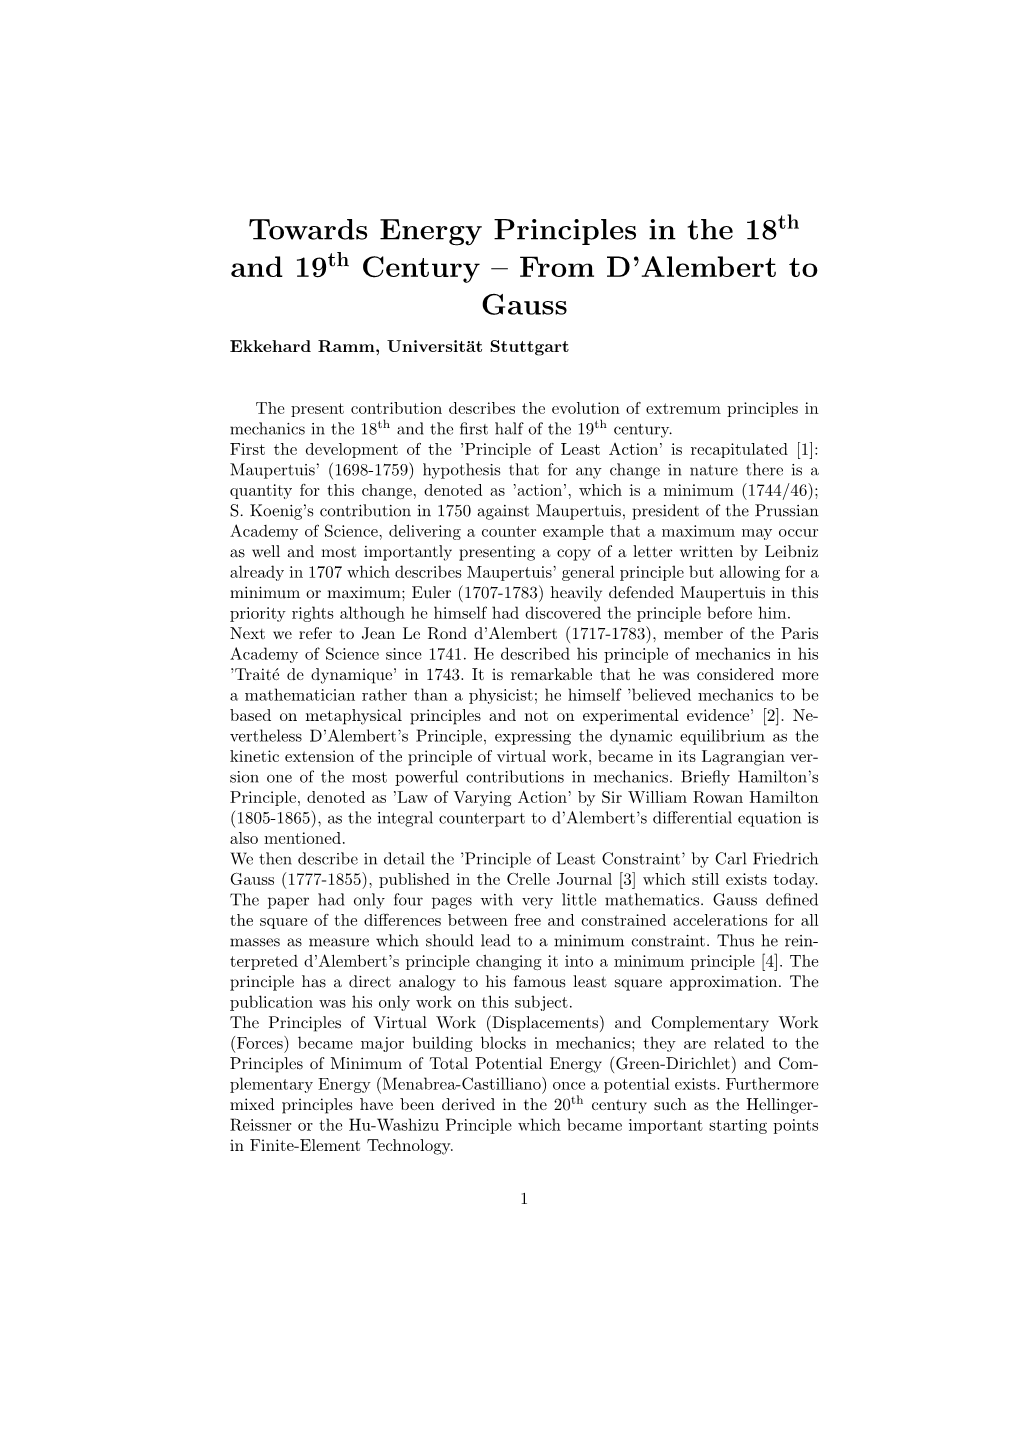 Towards Energy Principles in the 18Th and 19Th Century – from D’Alembert to Gauss